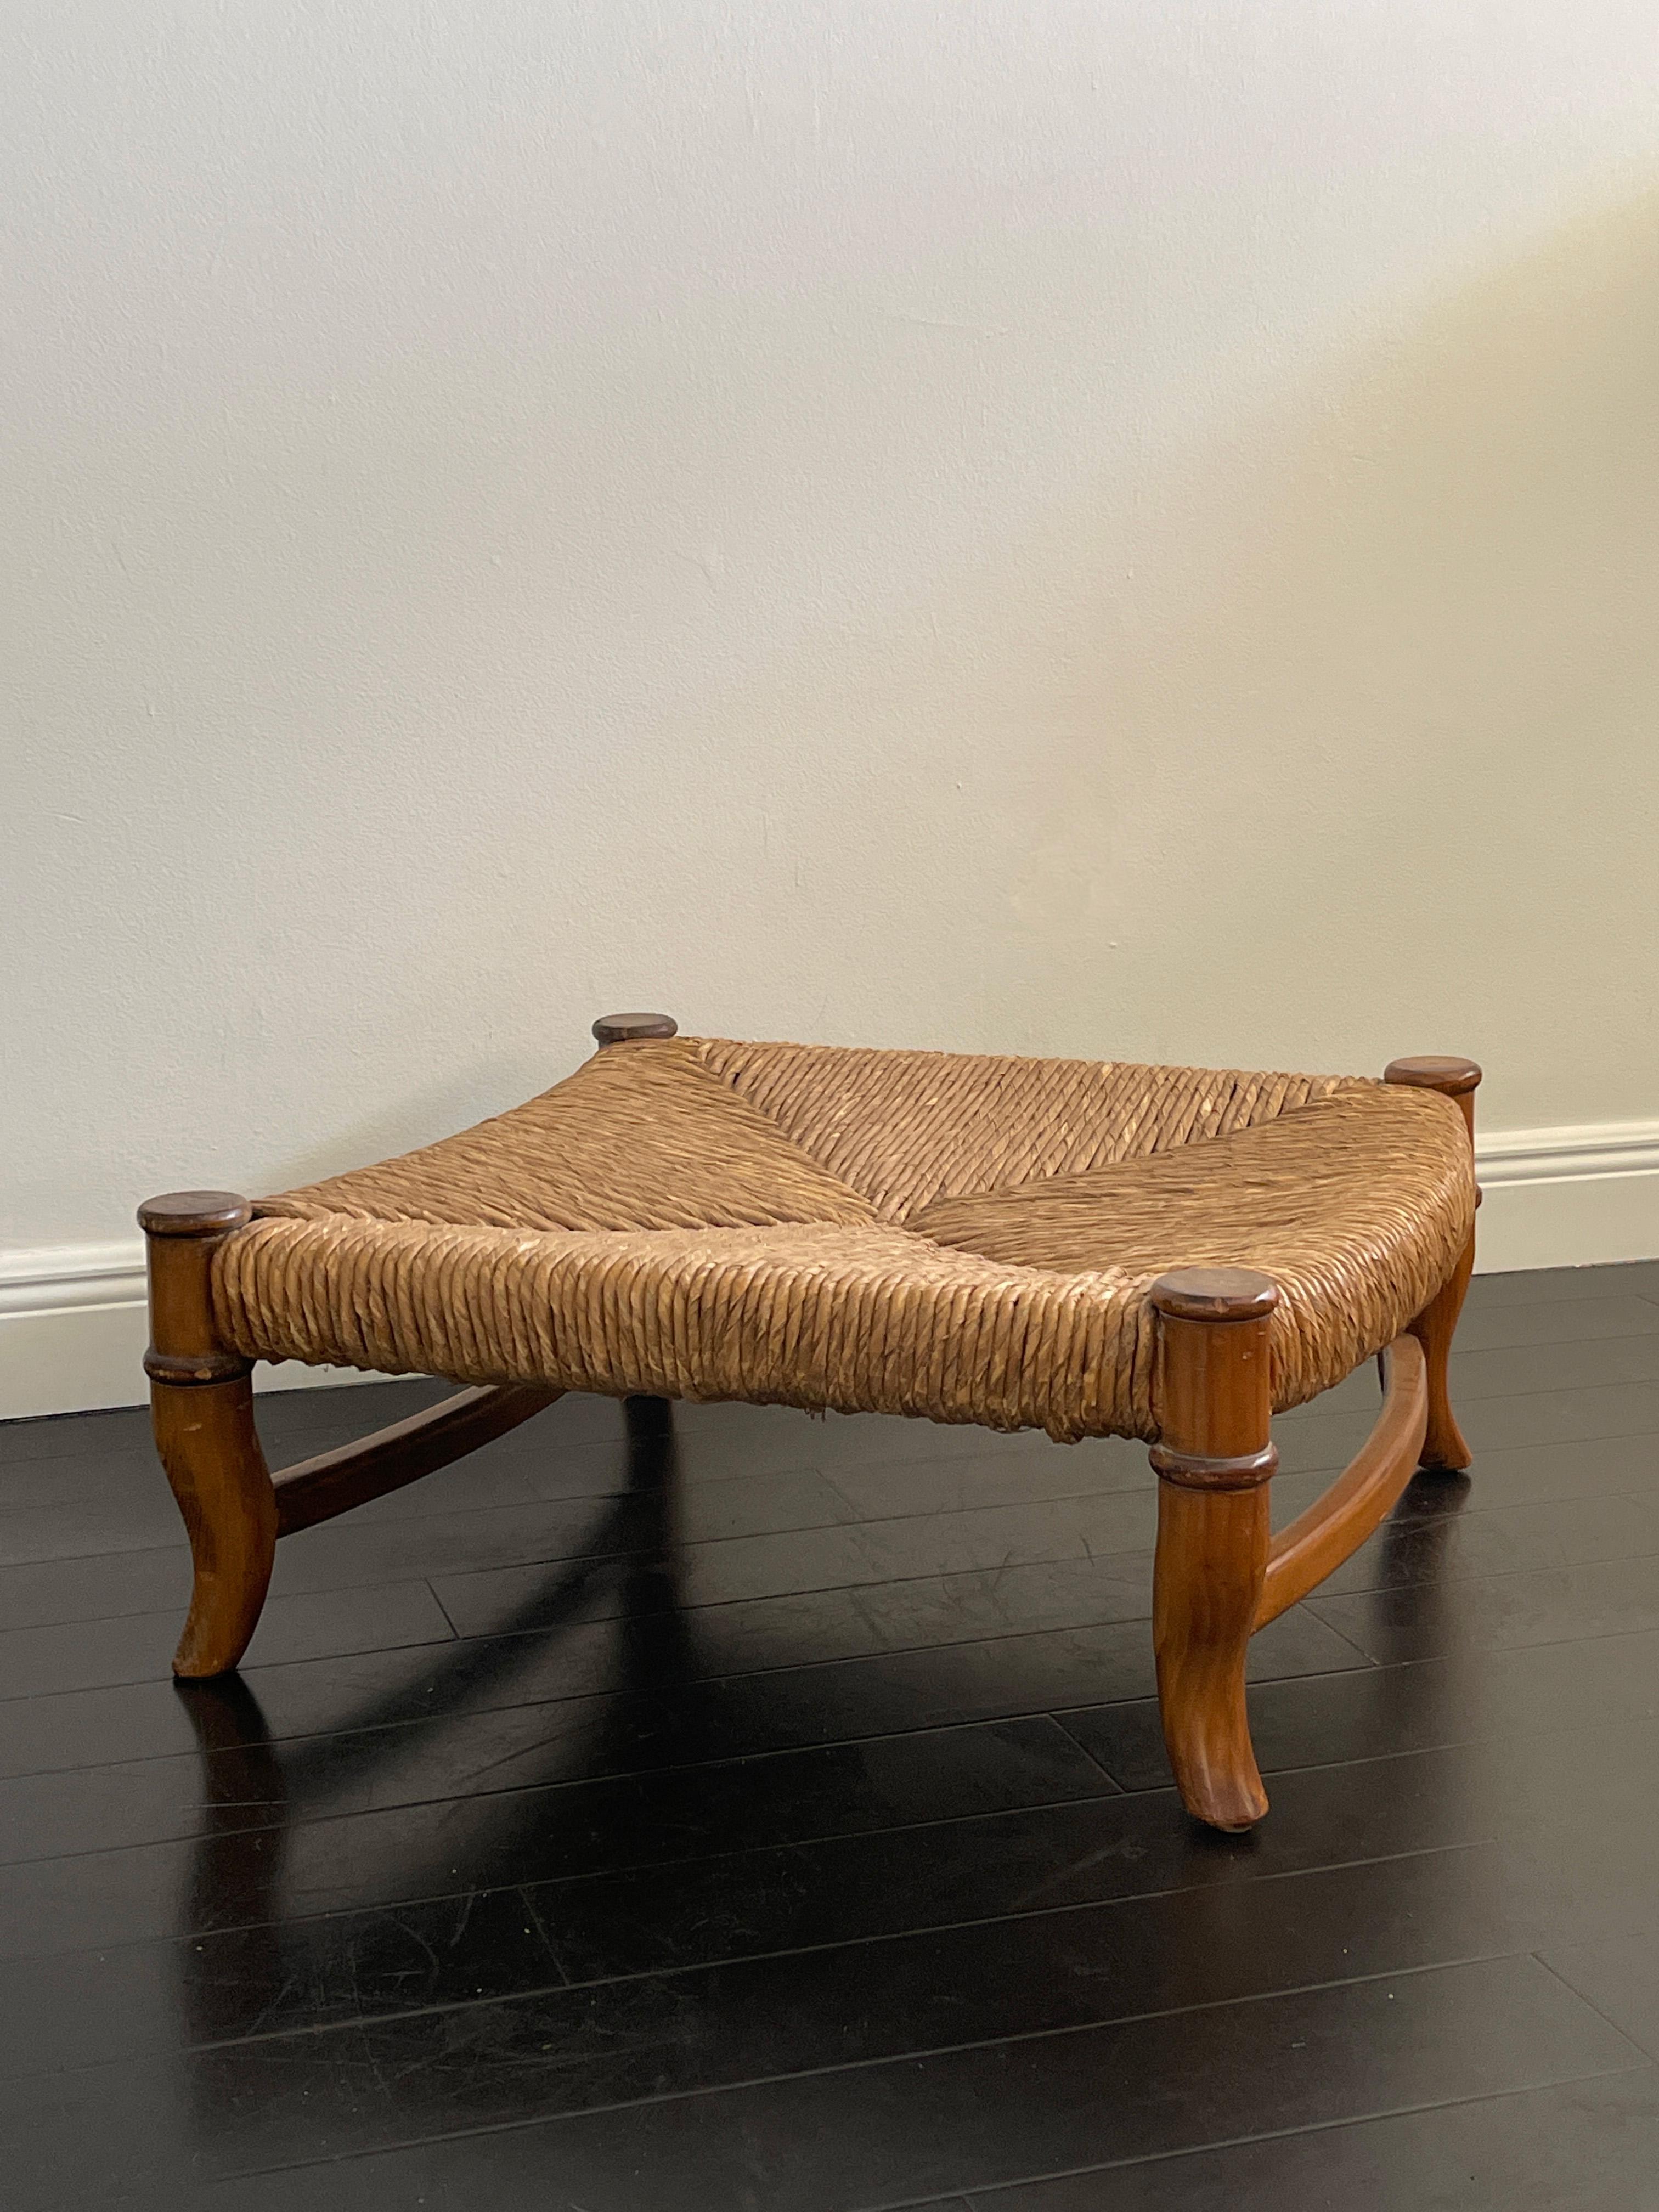 20th Century hand woven wicker and wood ottoman with bent wood legs. Beautiful design and organic colors and feel. Perfect for an ottoman or a coffee table.